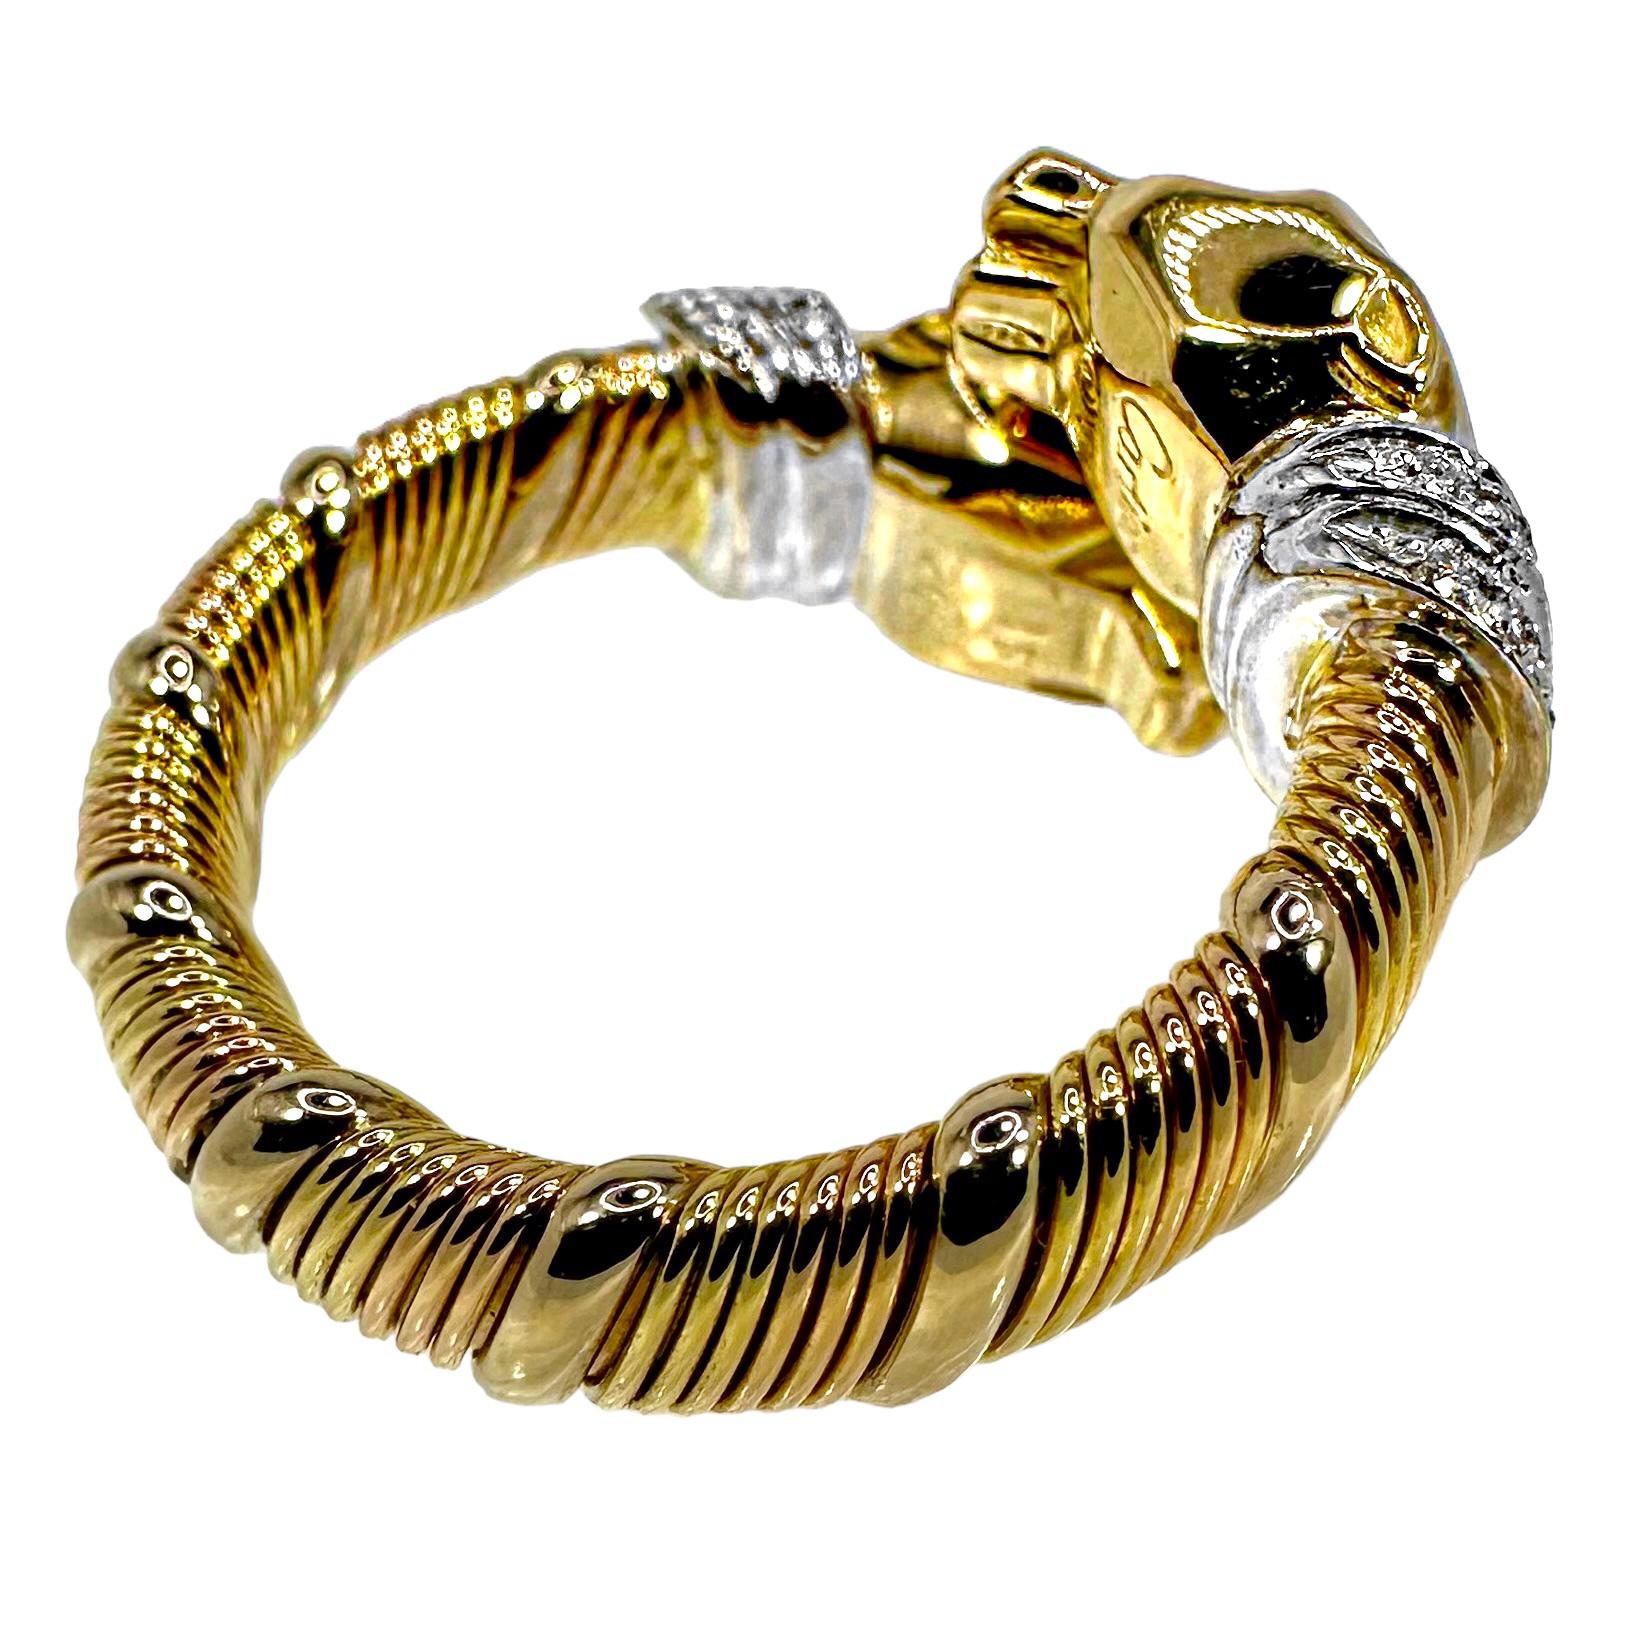 Brilliant Cut Iconic Cartier Panthere Bypass Ring in Gold and Diamonds